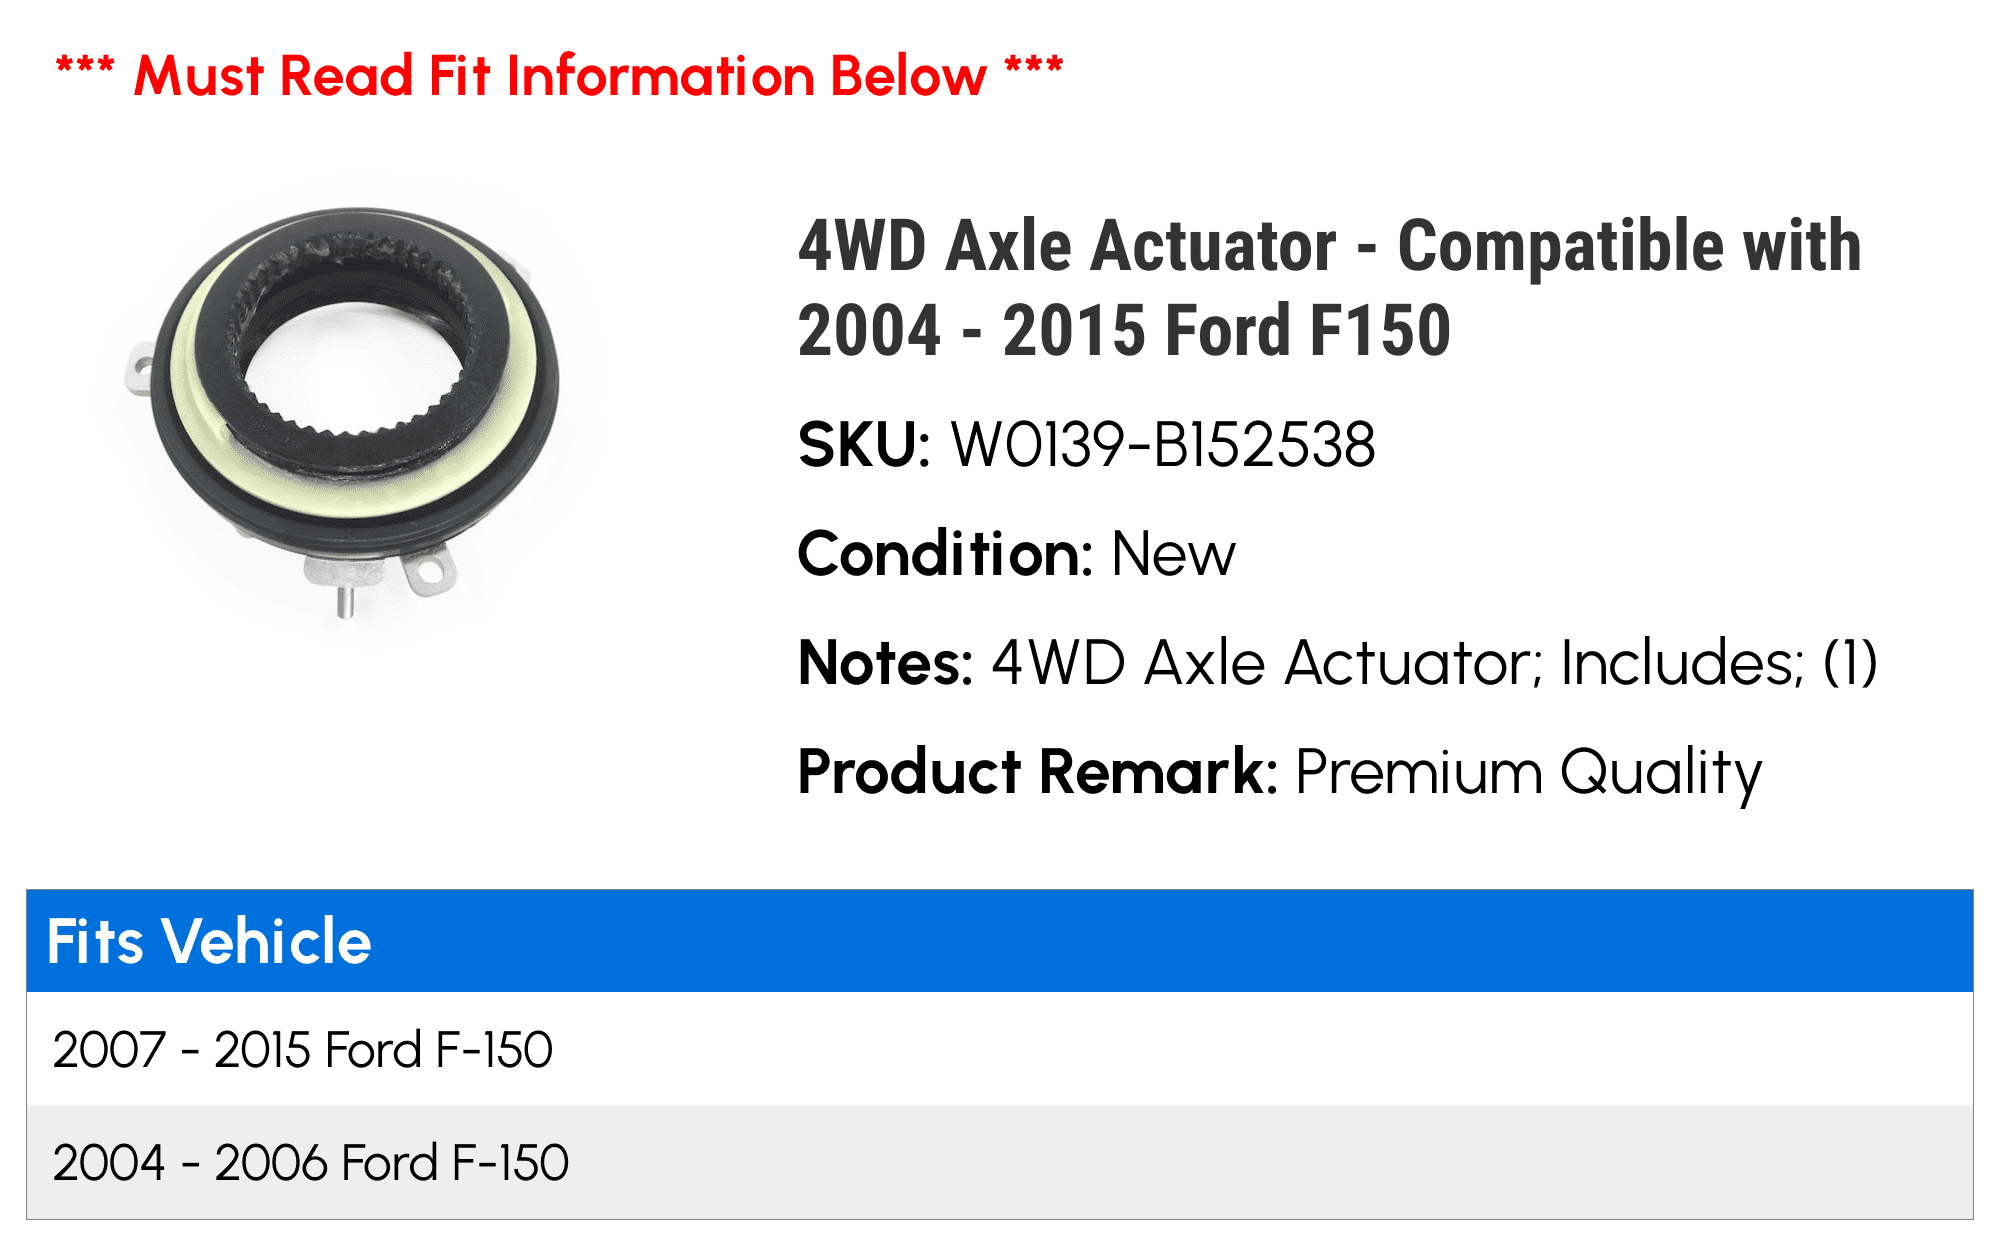 4WD Axle Actuator Compatible with 2004-2015 Ford F150 